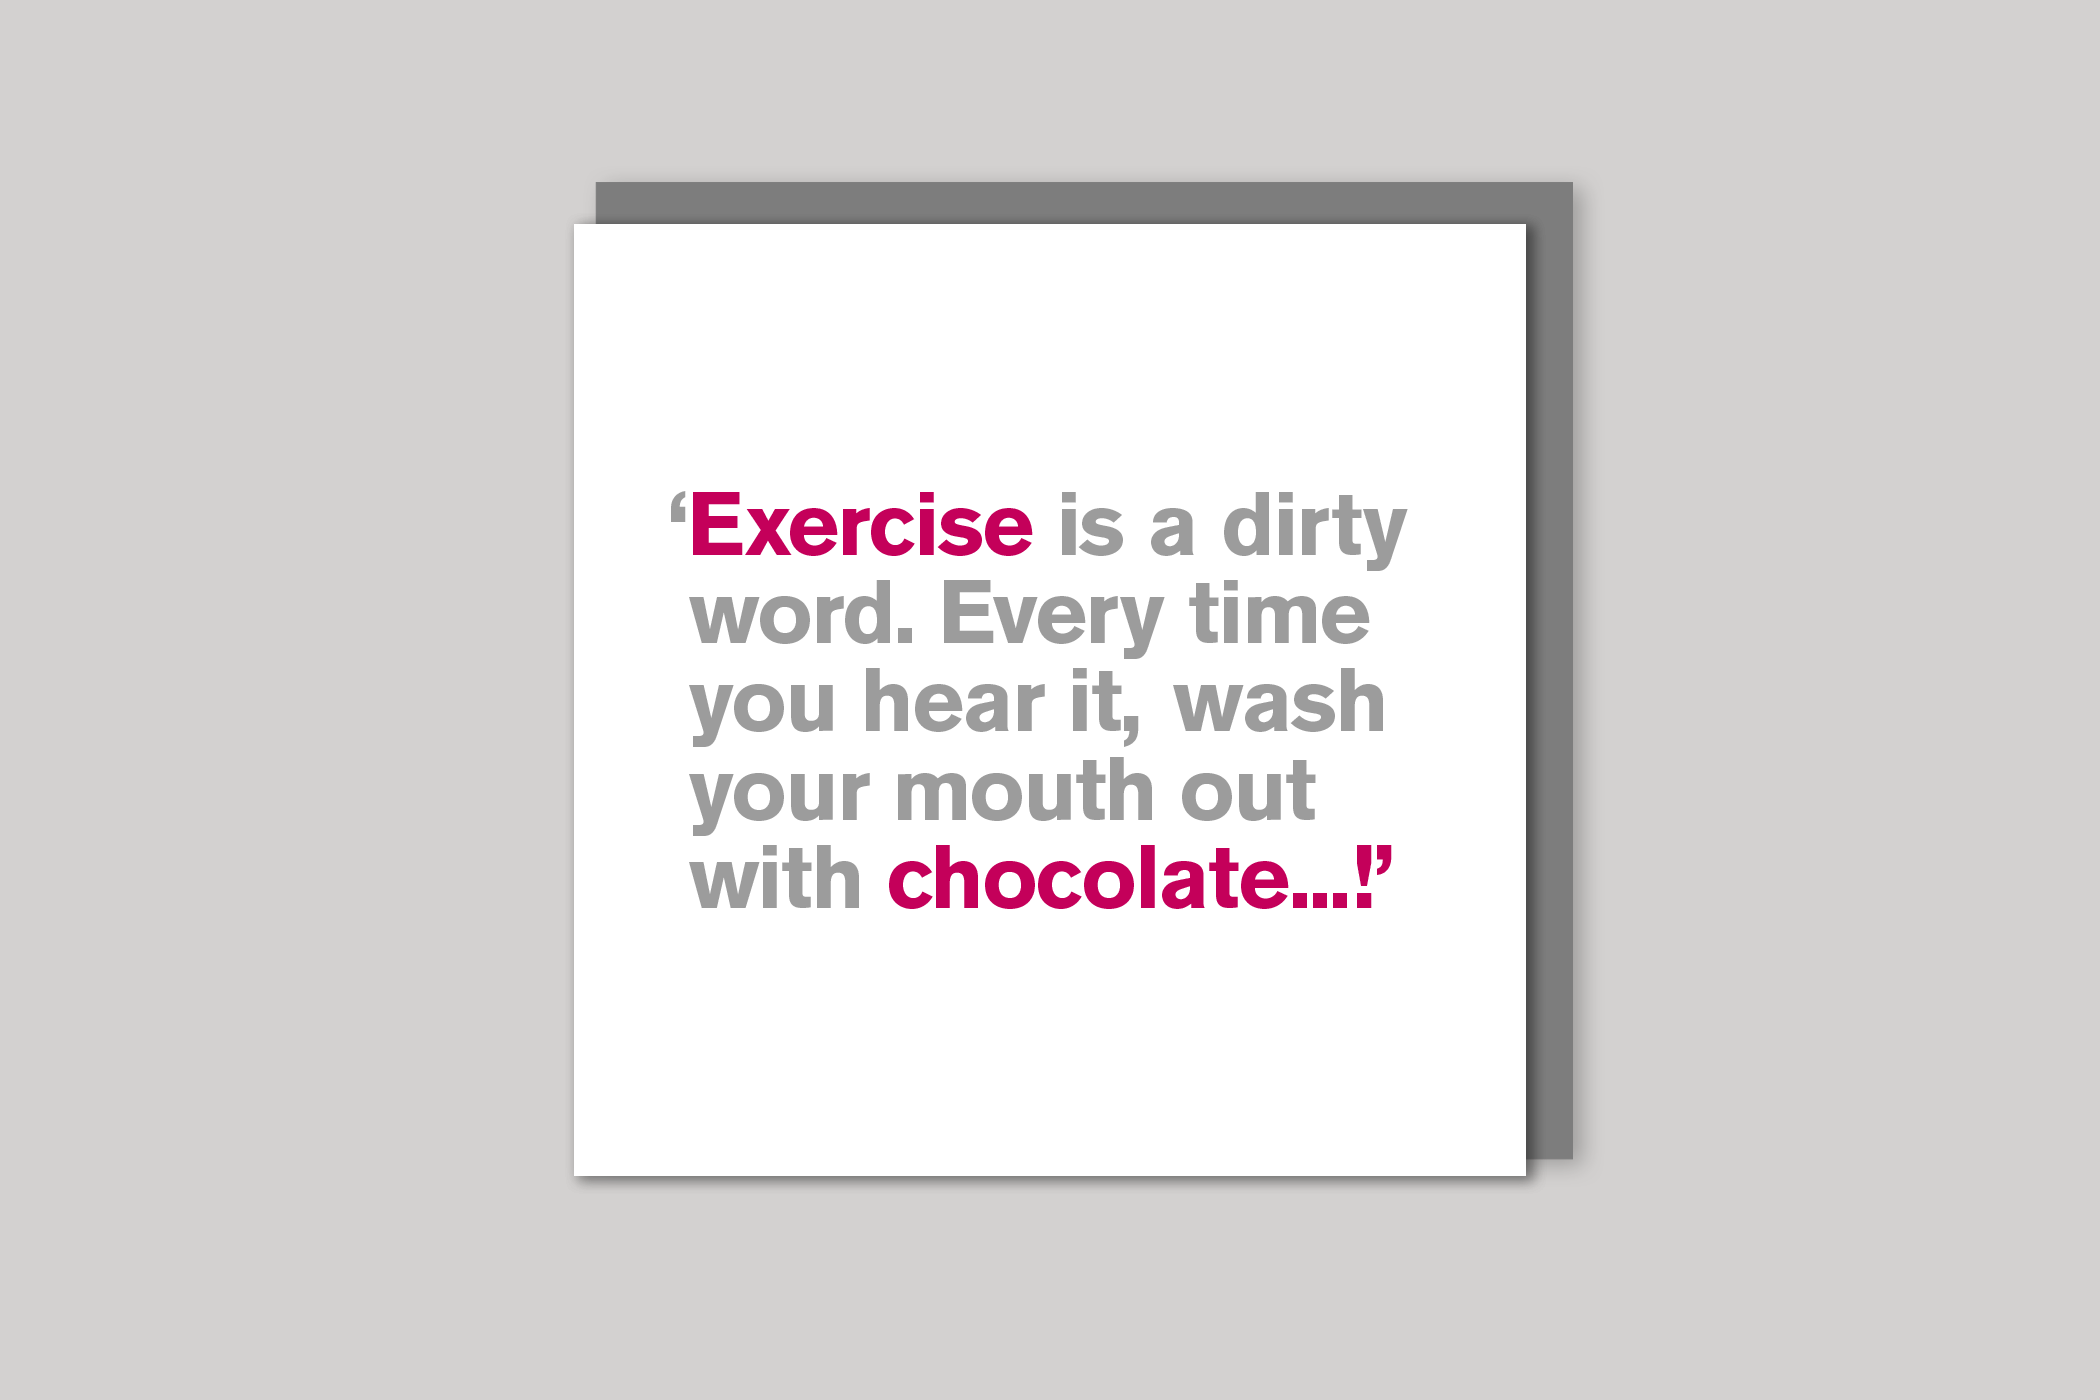 Exercise is a Dirty Word from Lyric range of quotation cards by Icon, back page.